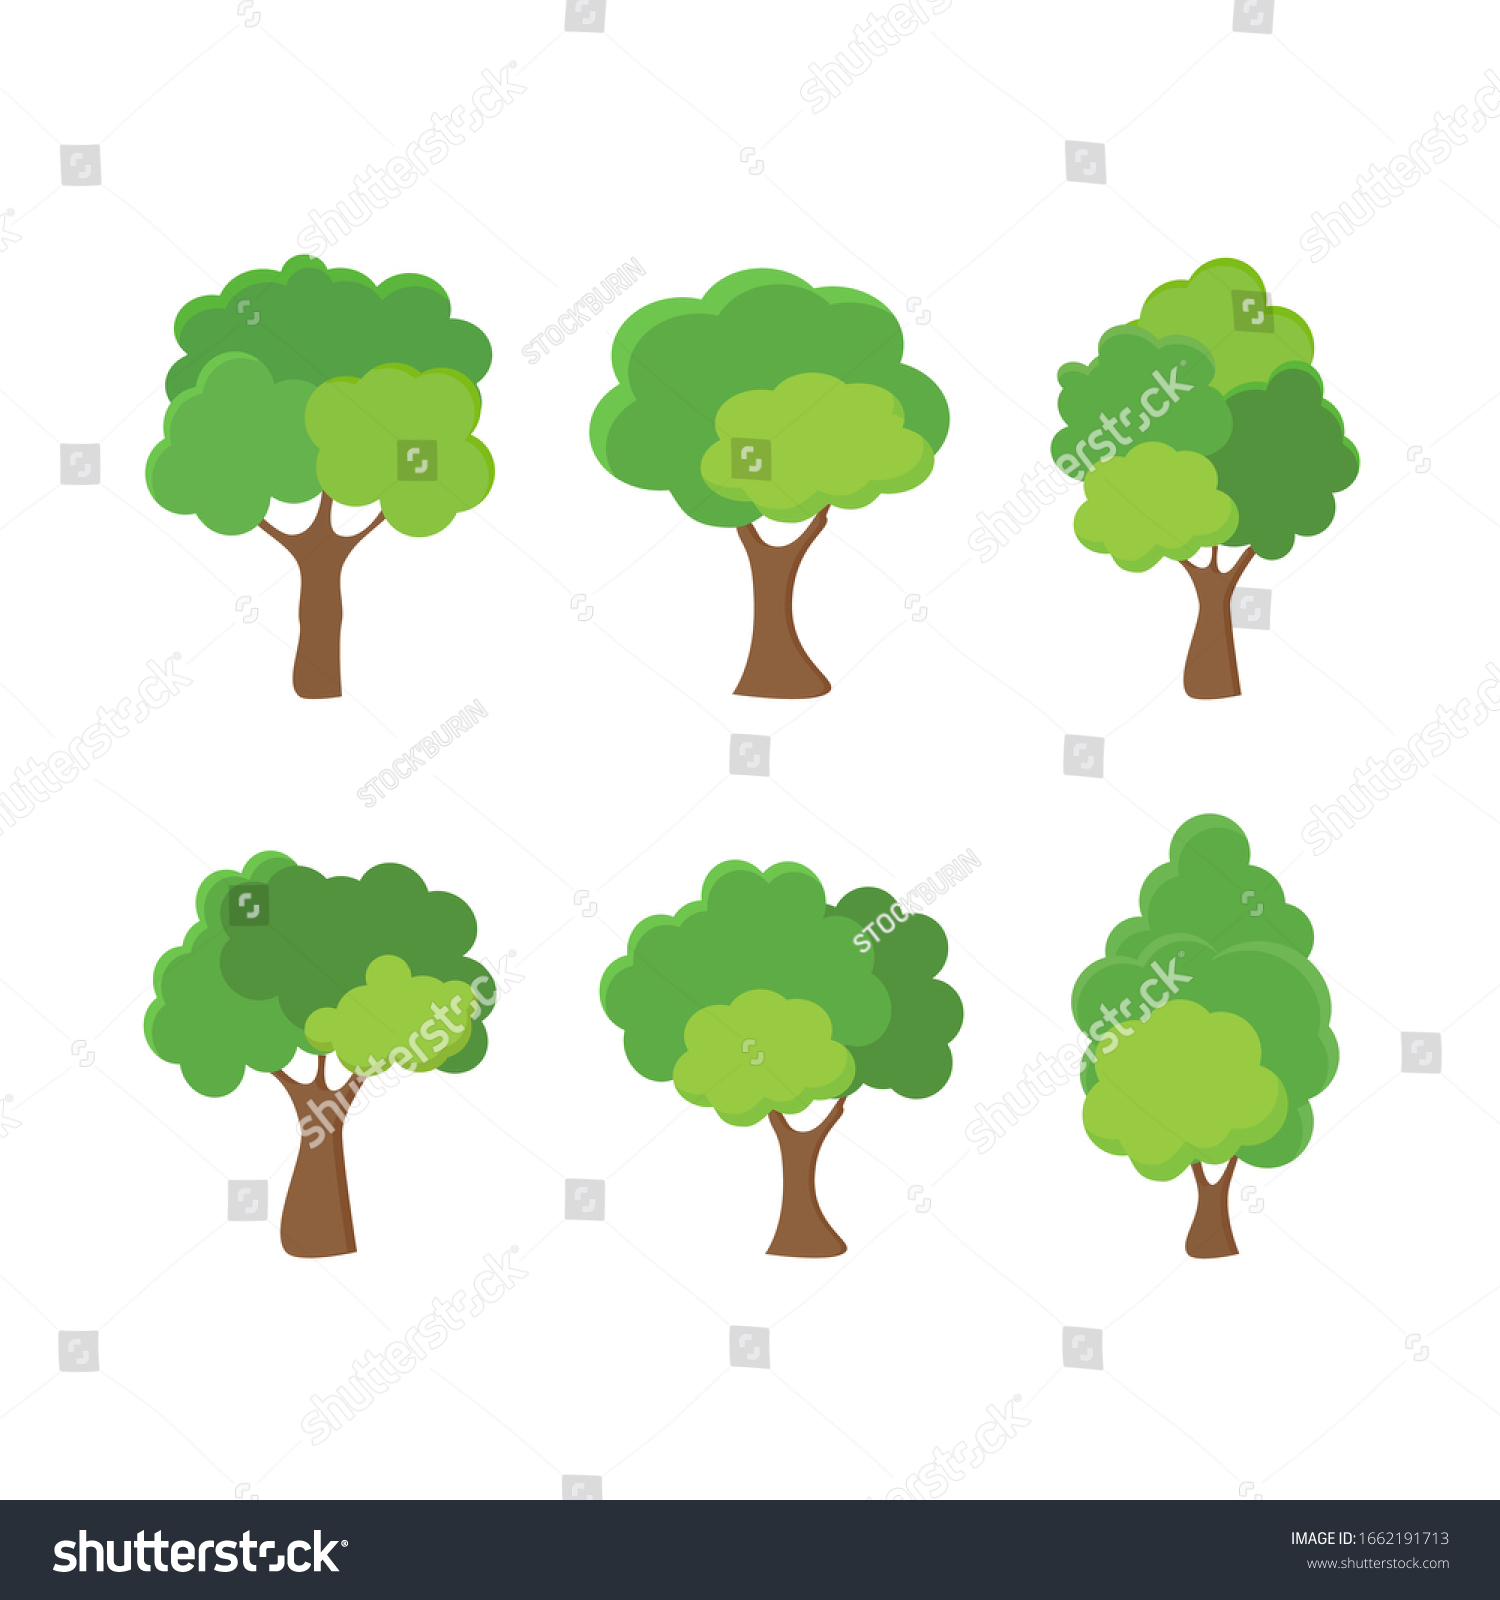 Green tree Fertile A variety of forms on the White Background,Set of various tree sets,Trees for decorating gardens and home designs.vector illustration and icon #1662191713